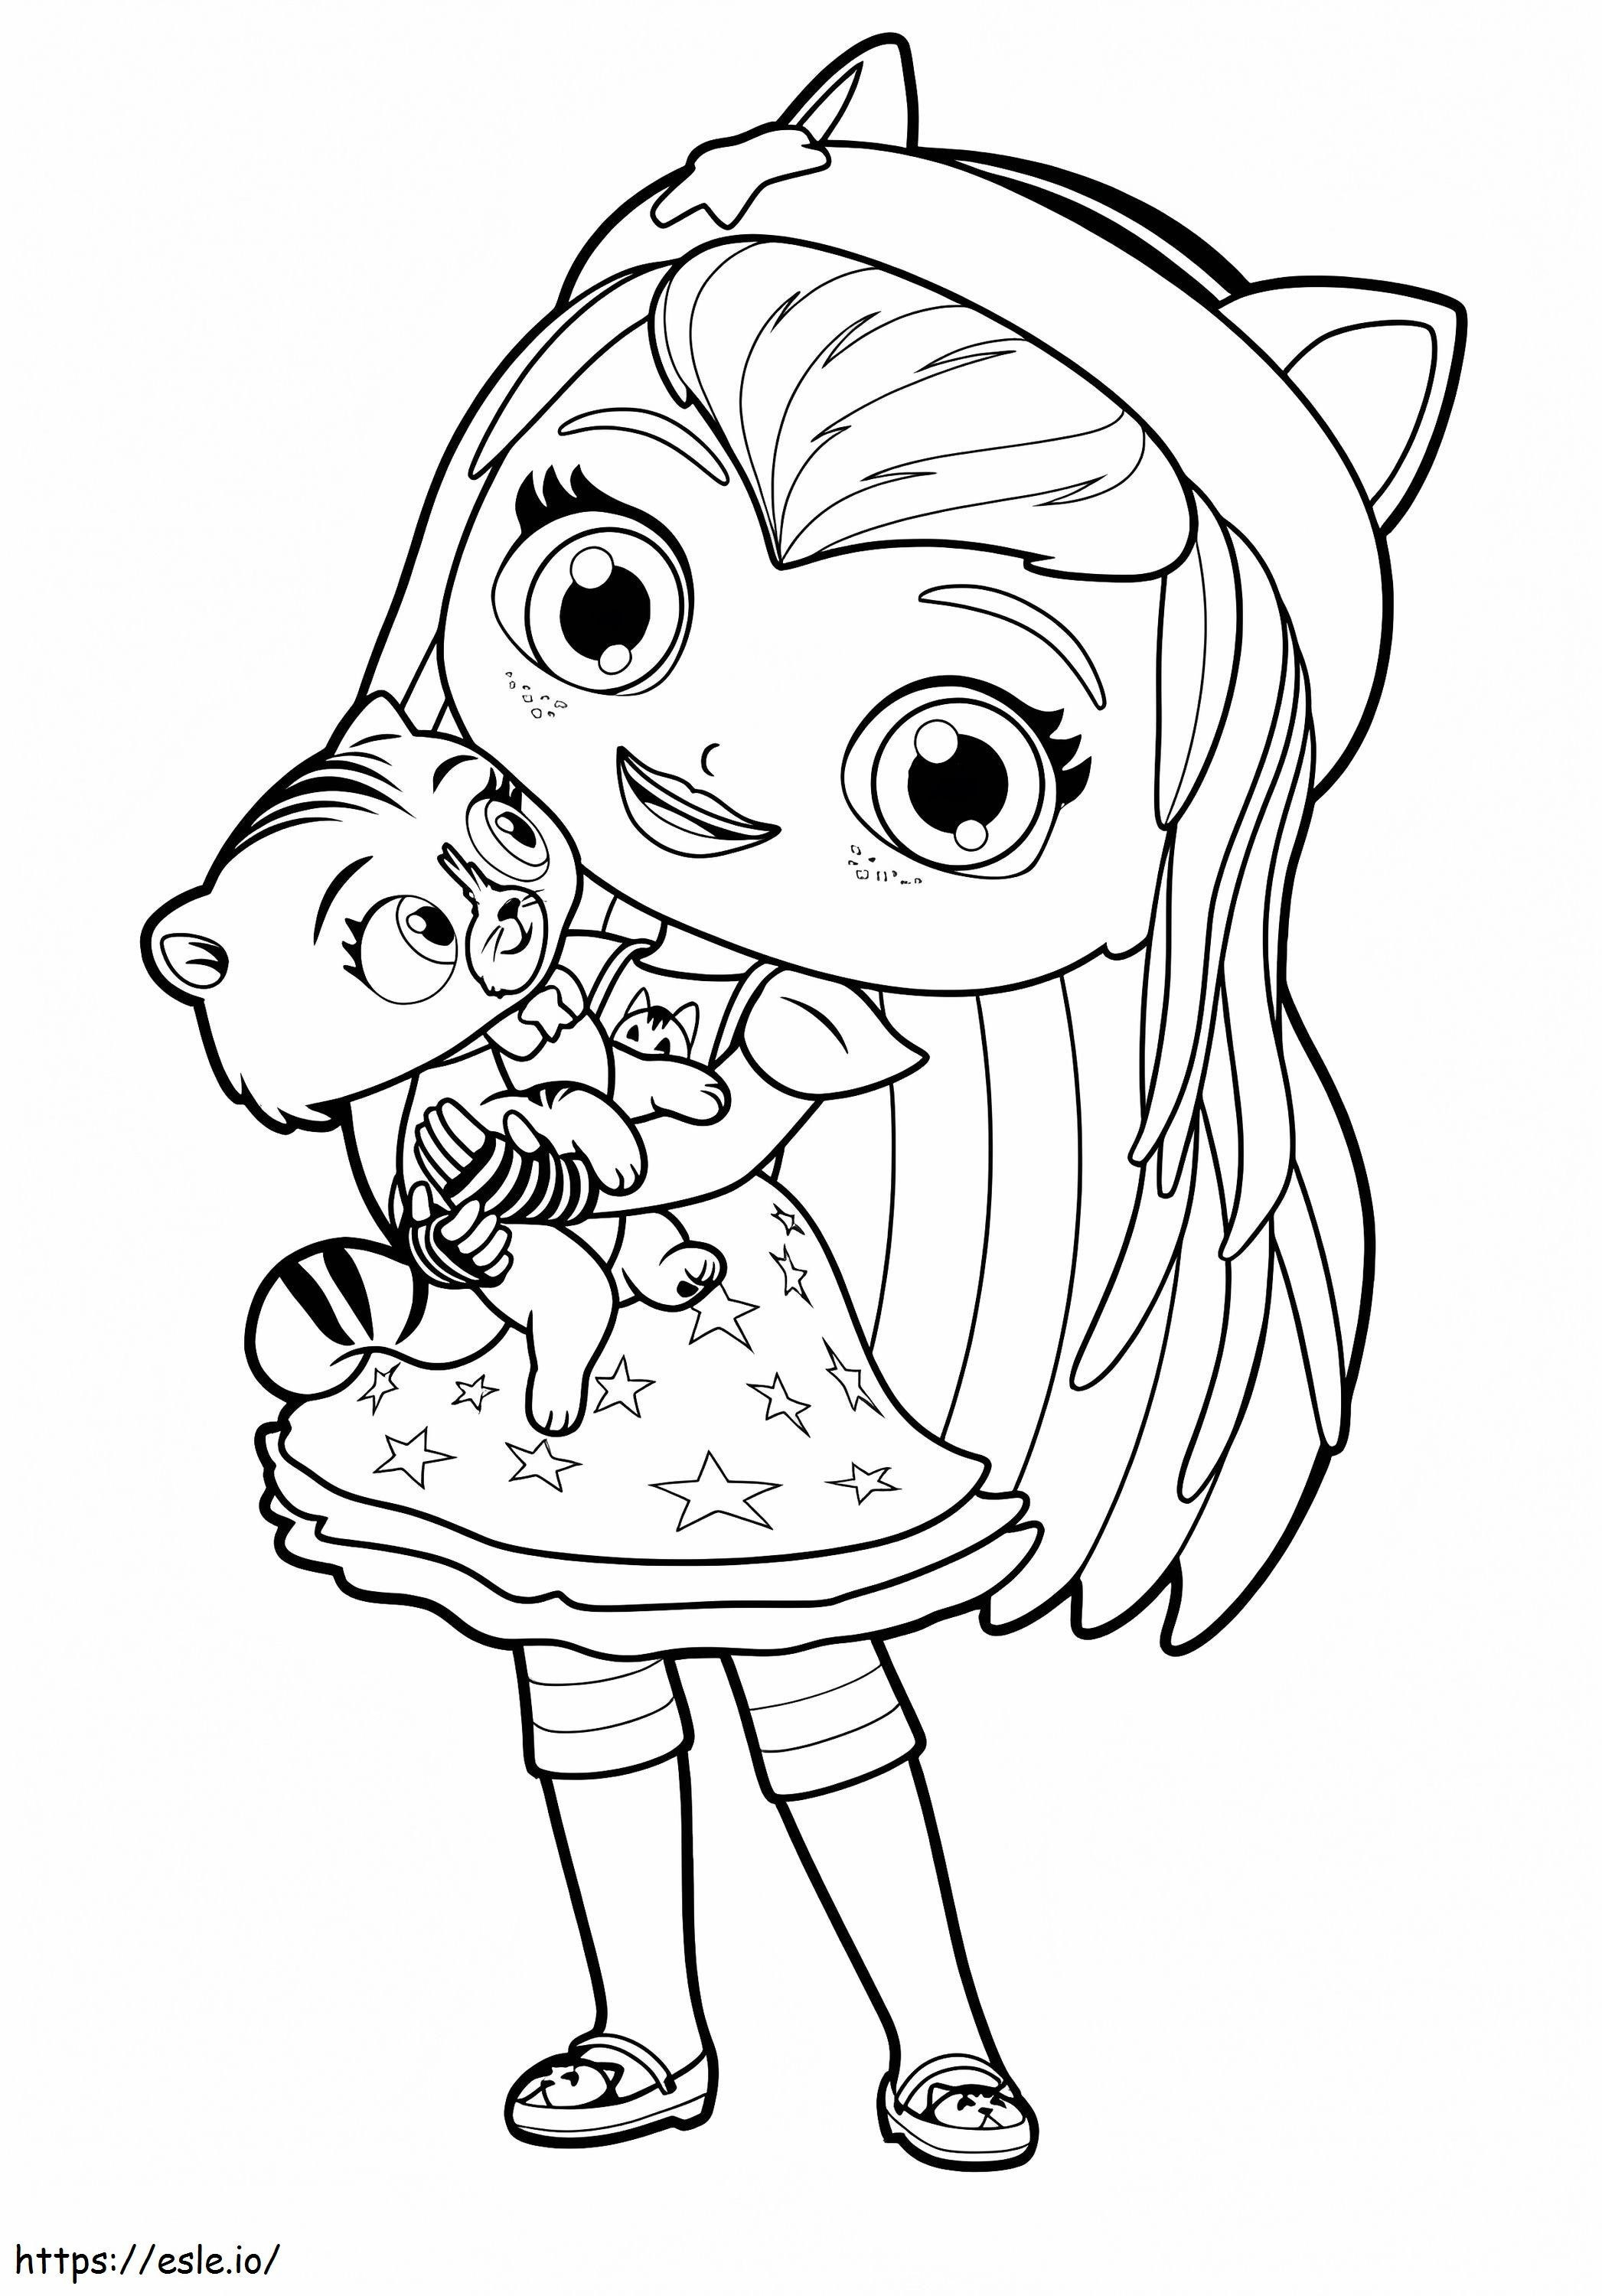 Hazel And Seven coloring page